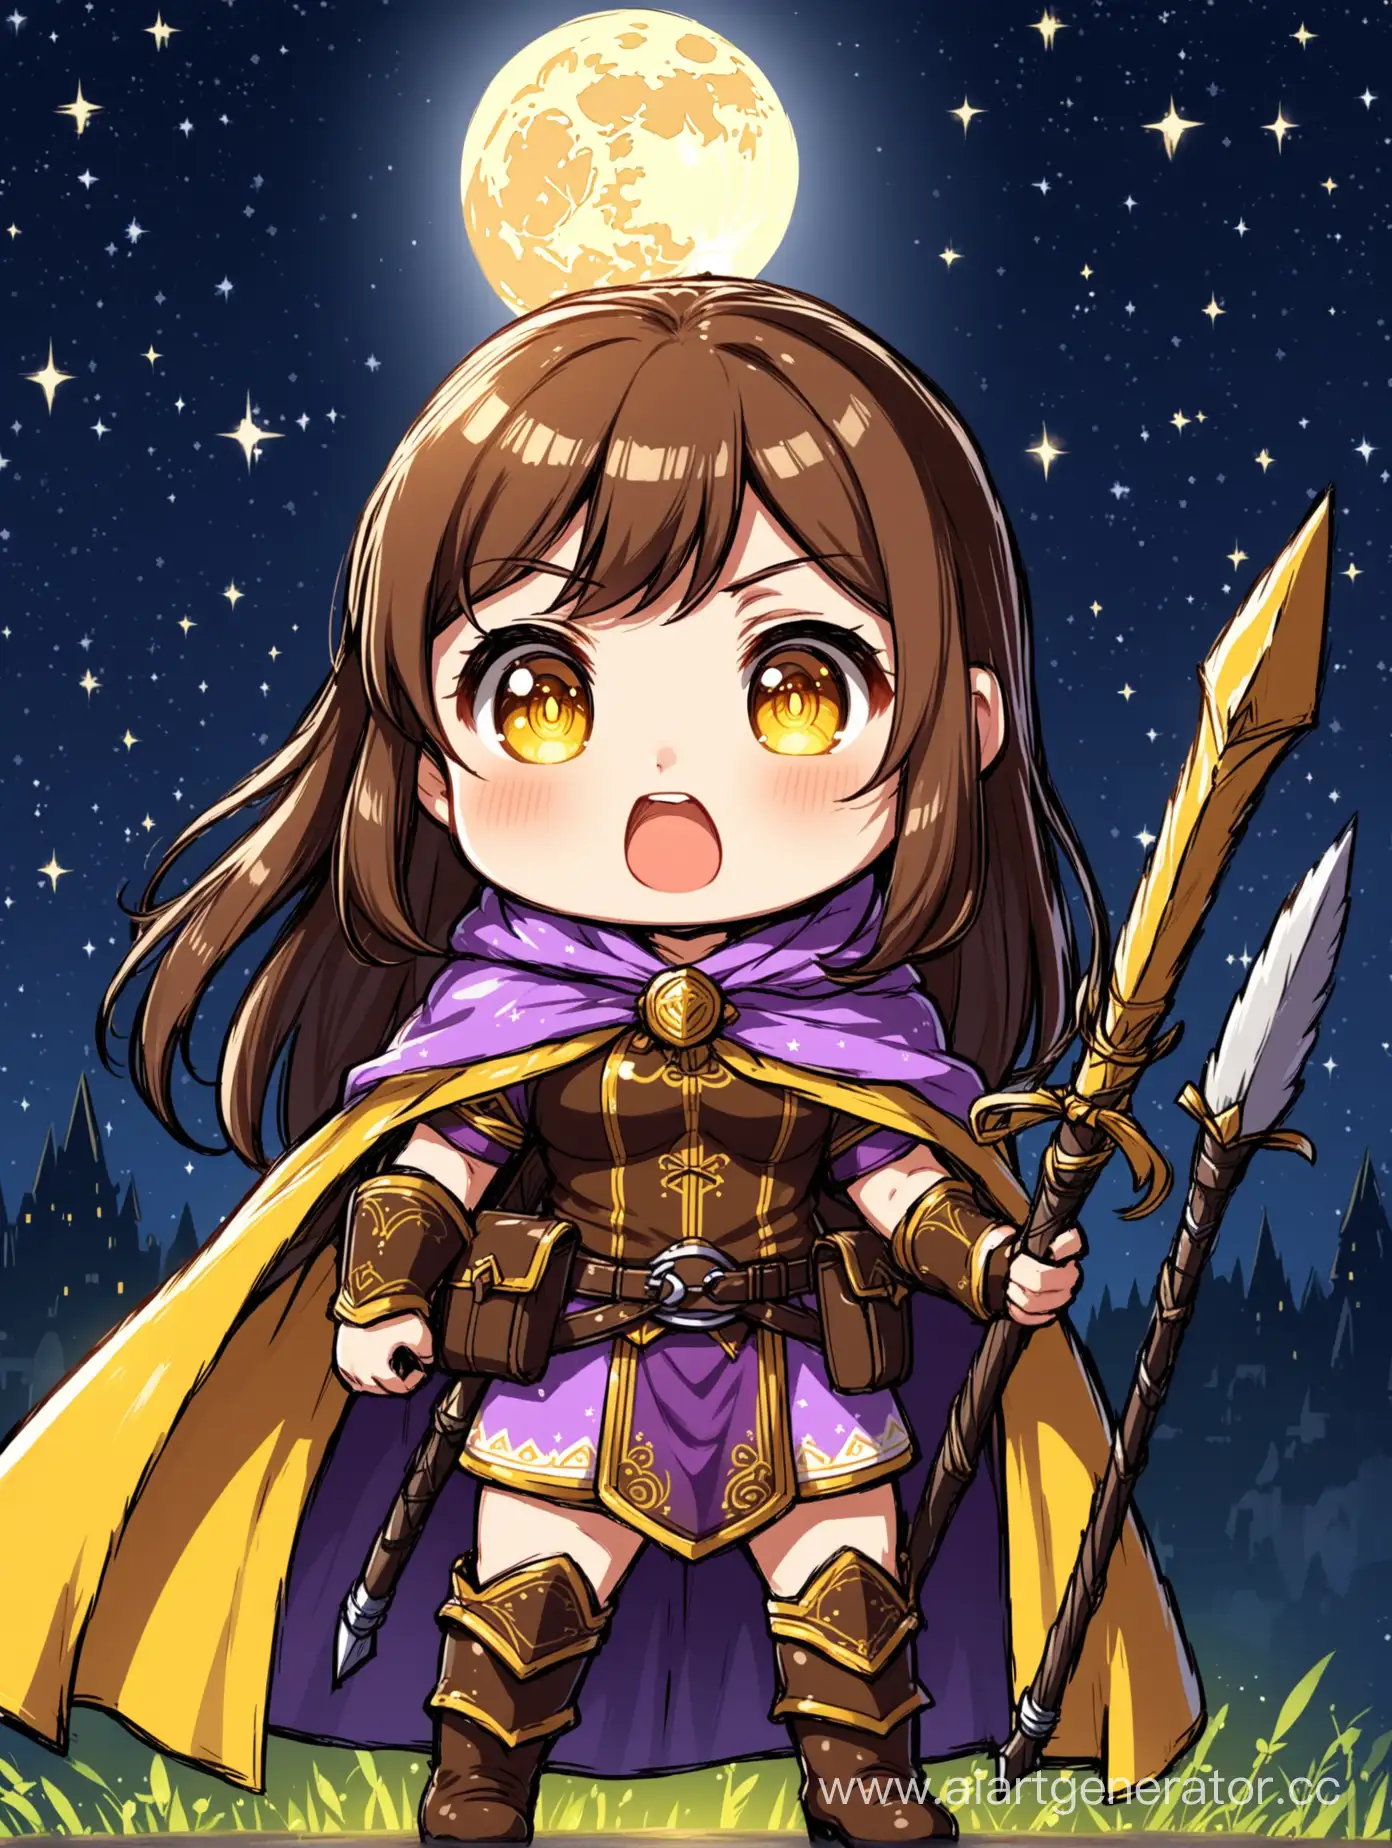 female adventurer with long brown hair and bangs, surprised face, wearing a long yellow and purple cloak and high boots, armed with quiver and bow against a night moon), close-up, high detail, chibi style